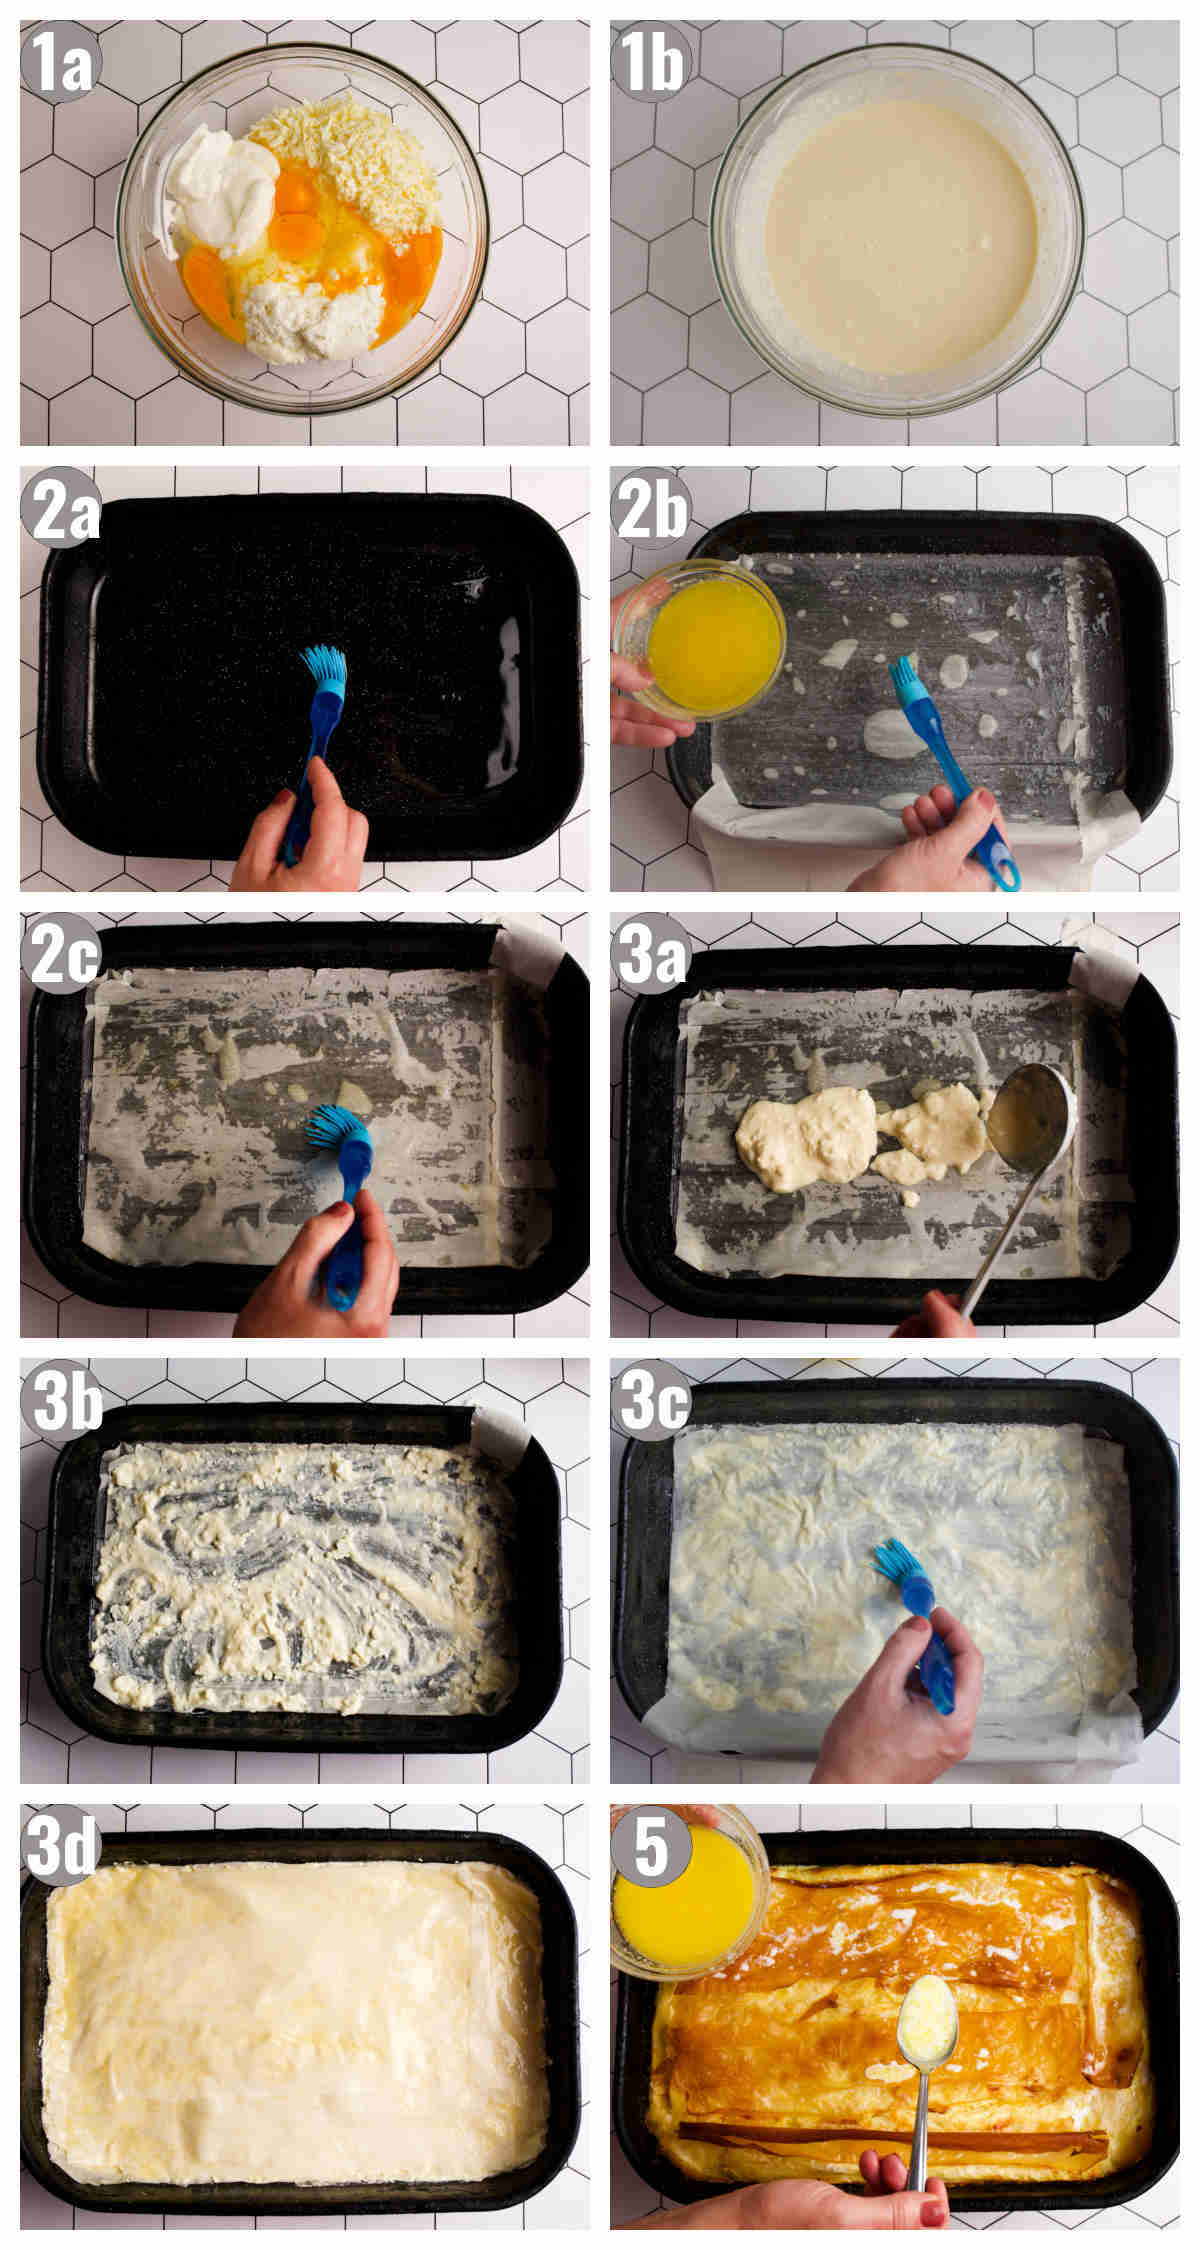 Ten prep photographs for cheese pie including stuffing and layering methods. 